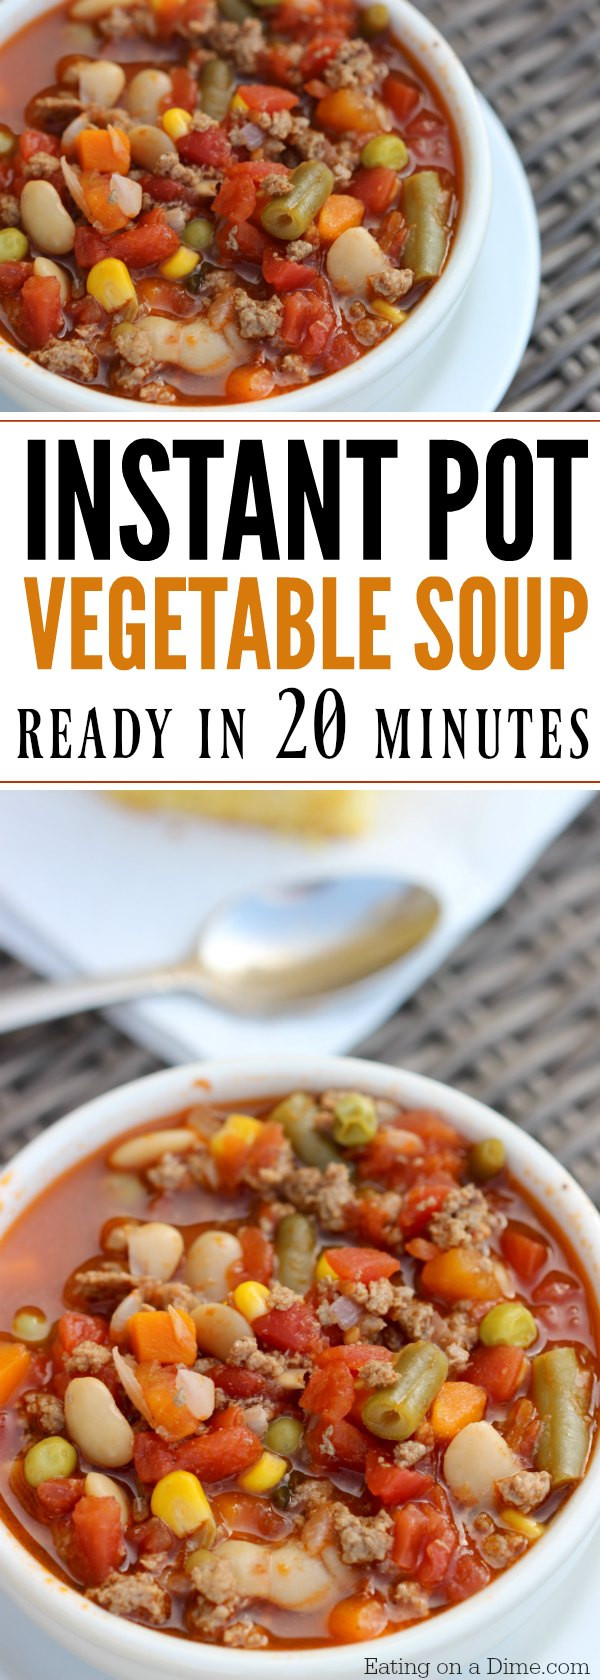 Instant Pot Beef Soup Recipes
 Instant Pot Beef Ve able Soup Recipe Eating on a Dime